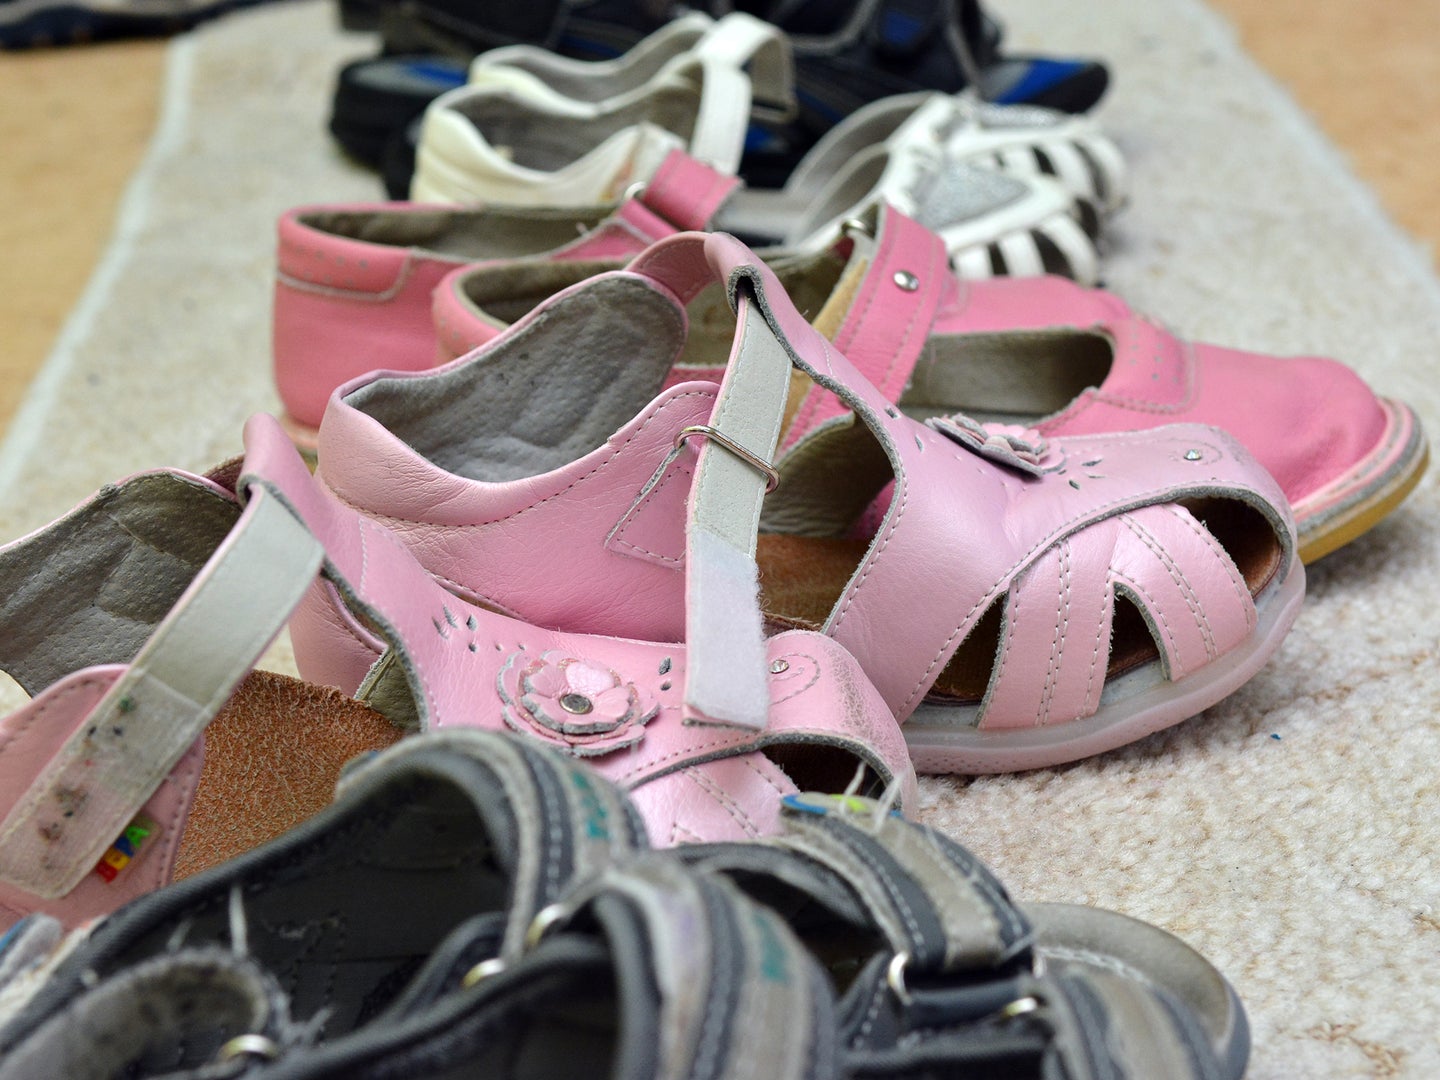 A photo of shoes on a mat at home to illustrate a story on the health risks of wearing street shoes indoors.